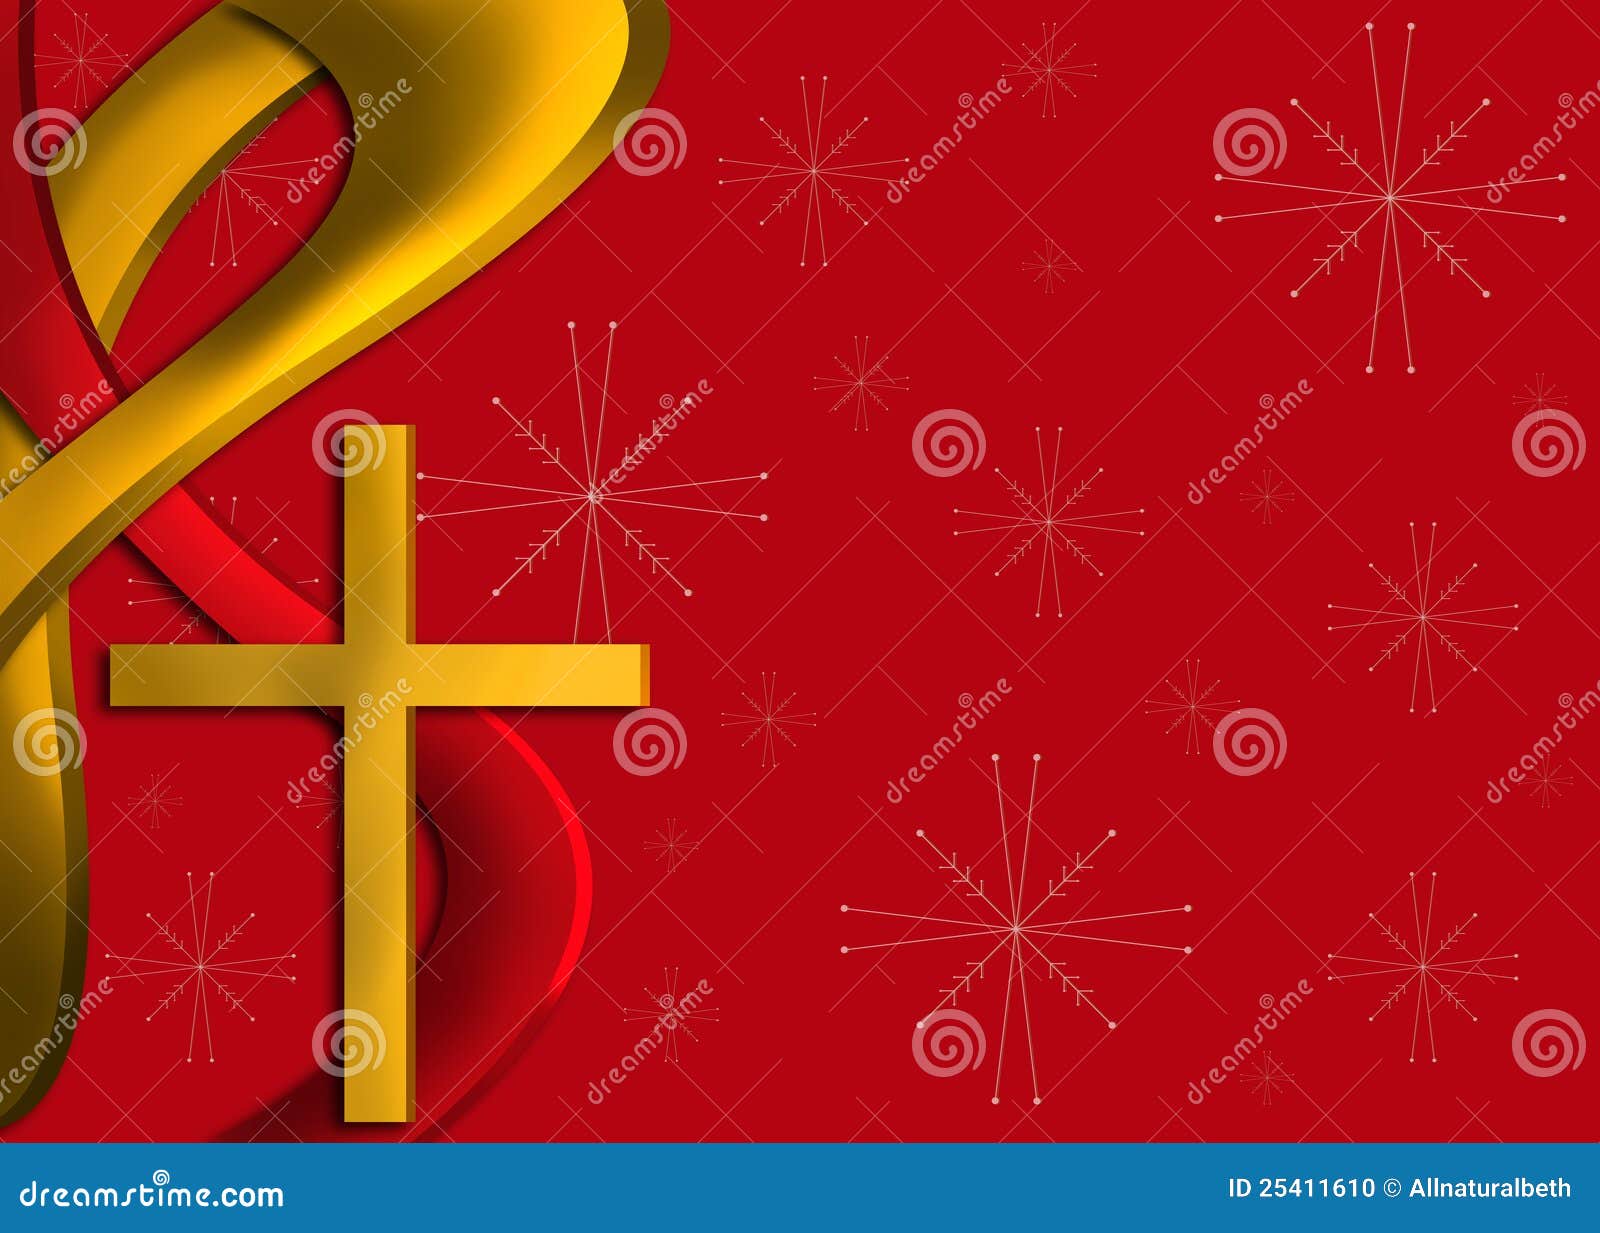 red and gold religious christmas background